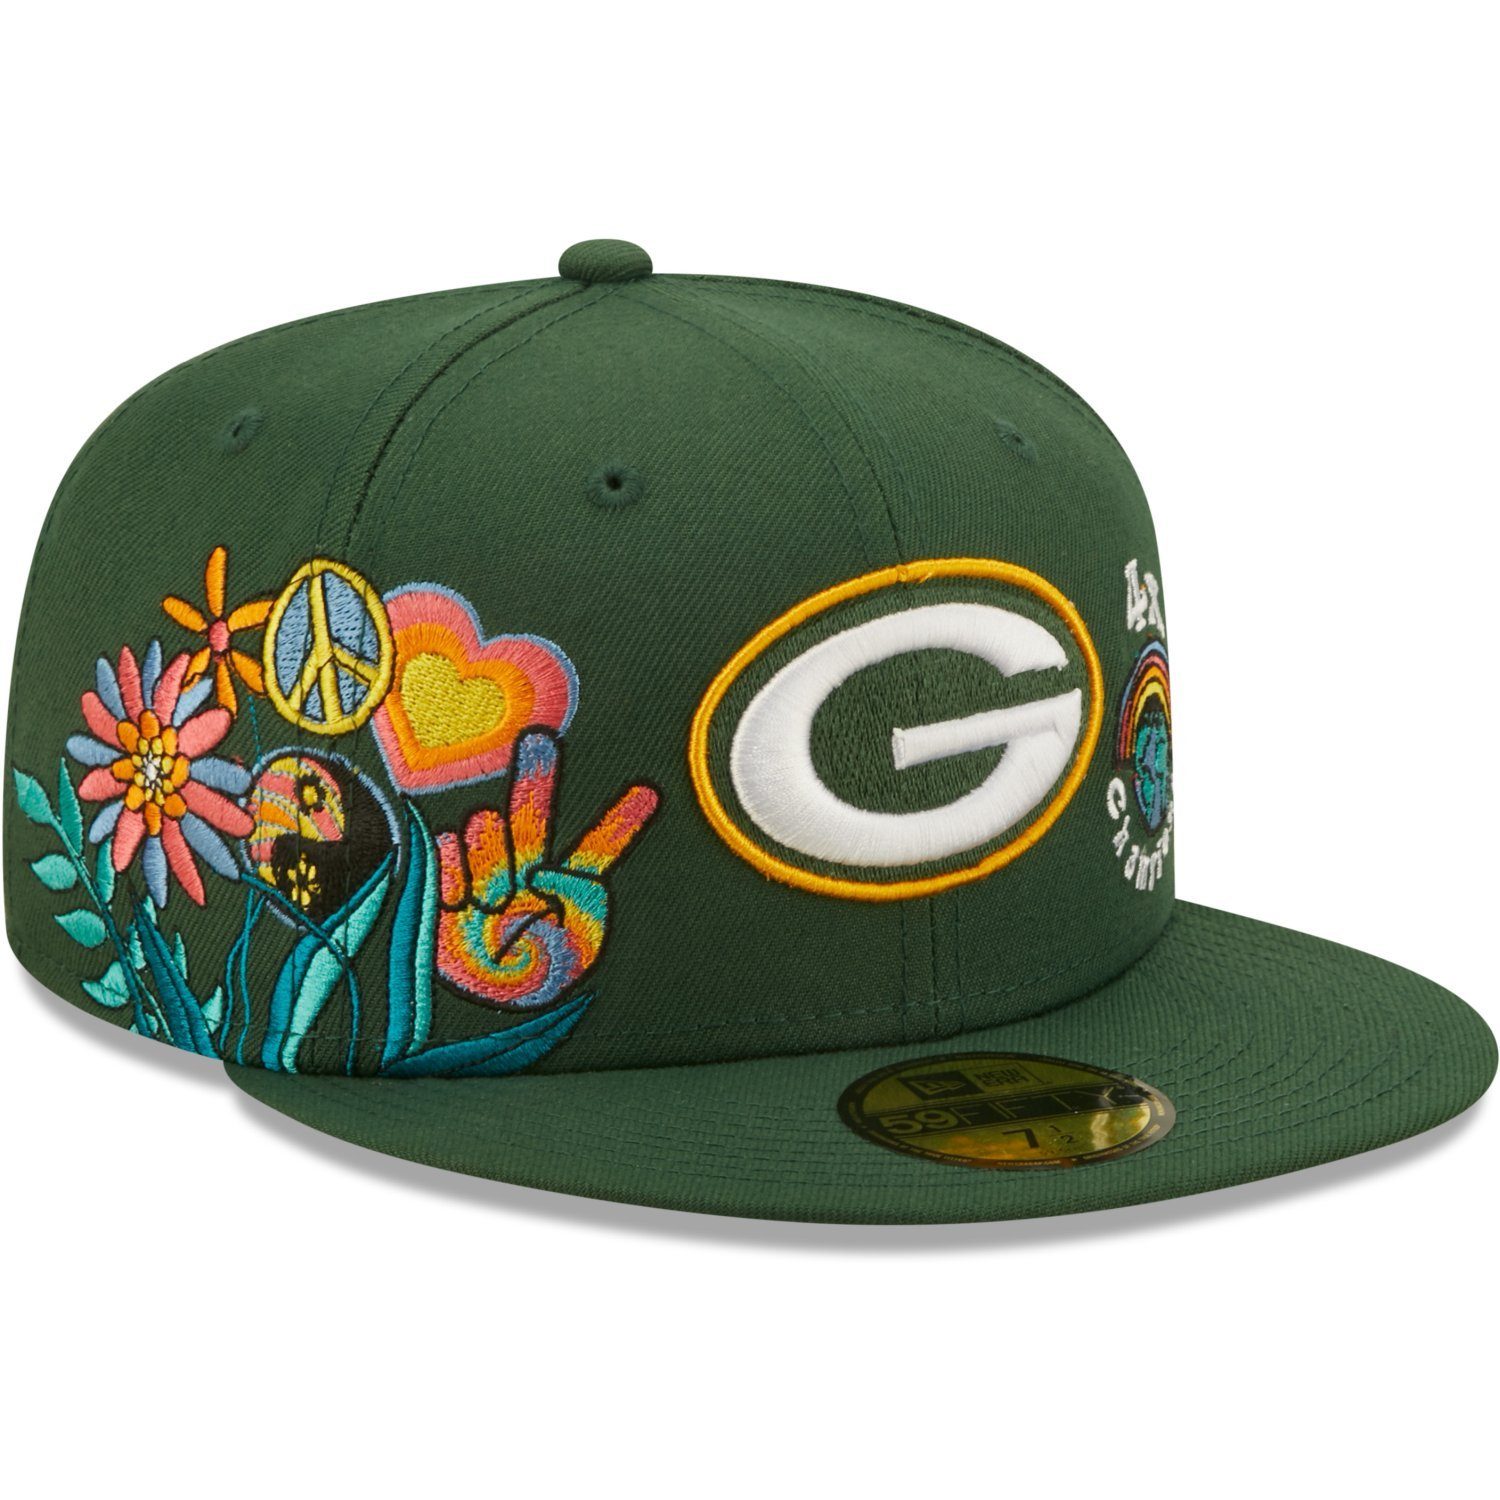 New Era Fitted Cap 59Fifty GROOVY Green Bay Packers | Fitted Caps